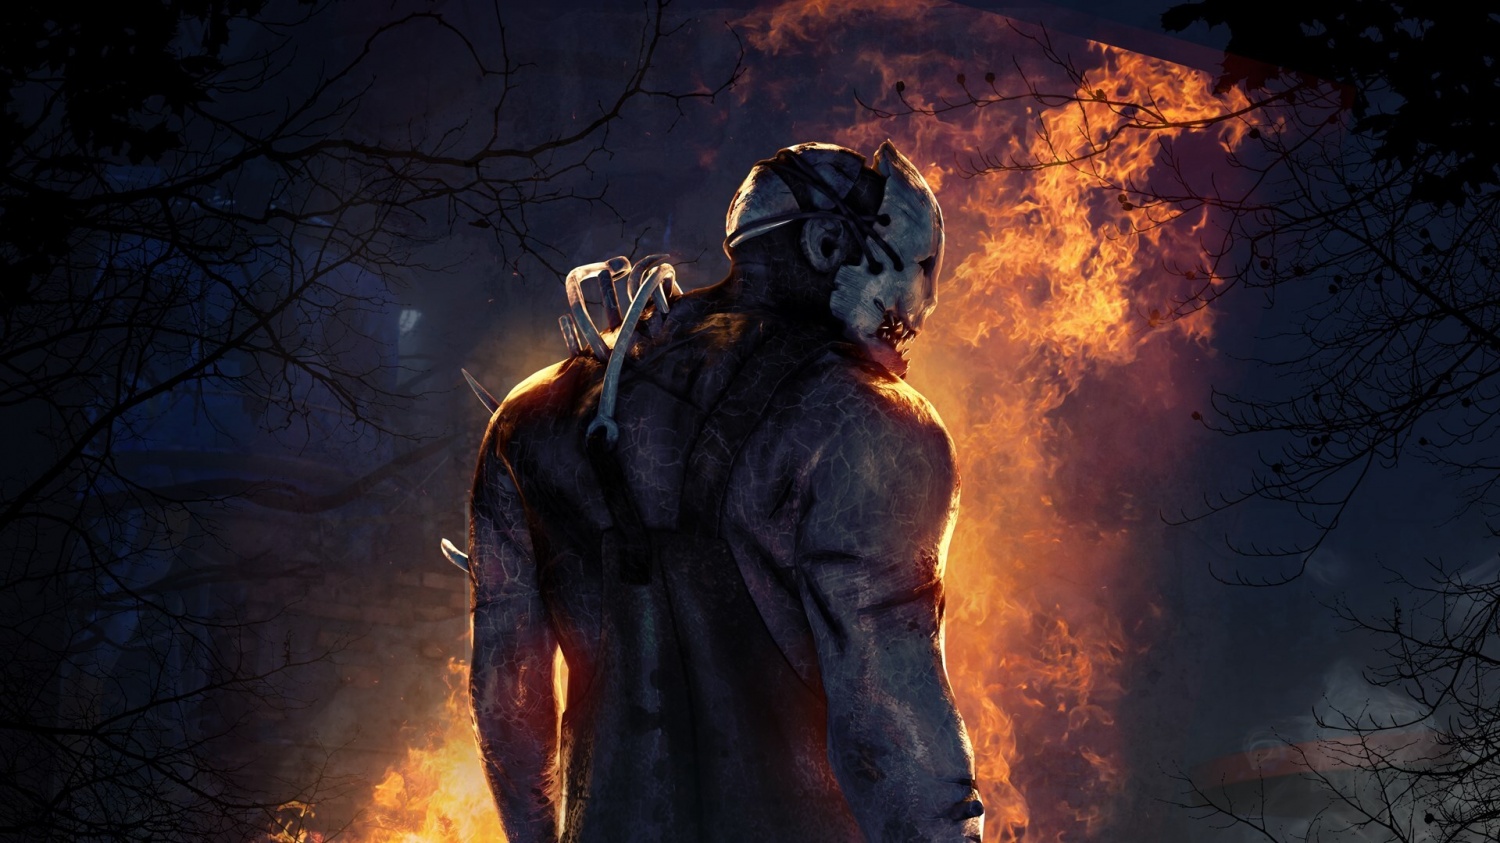 dead-by-daylight-reveals-new-crossover-chapters-dating-sim-game-itech-post